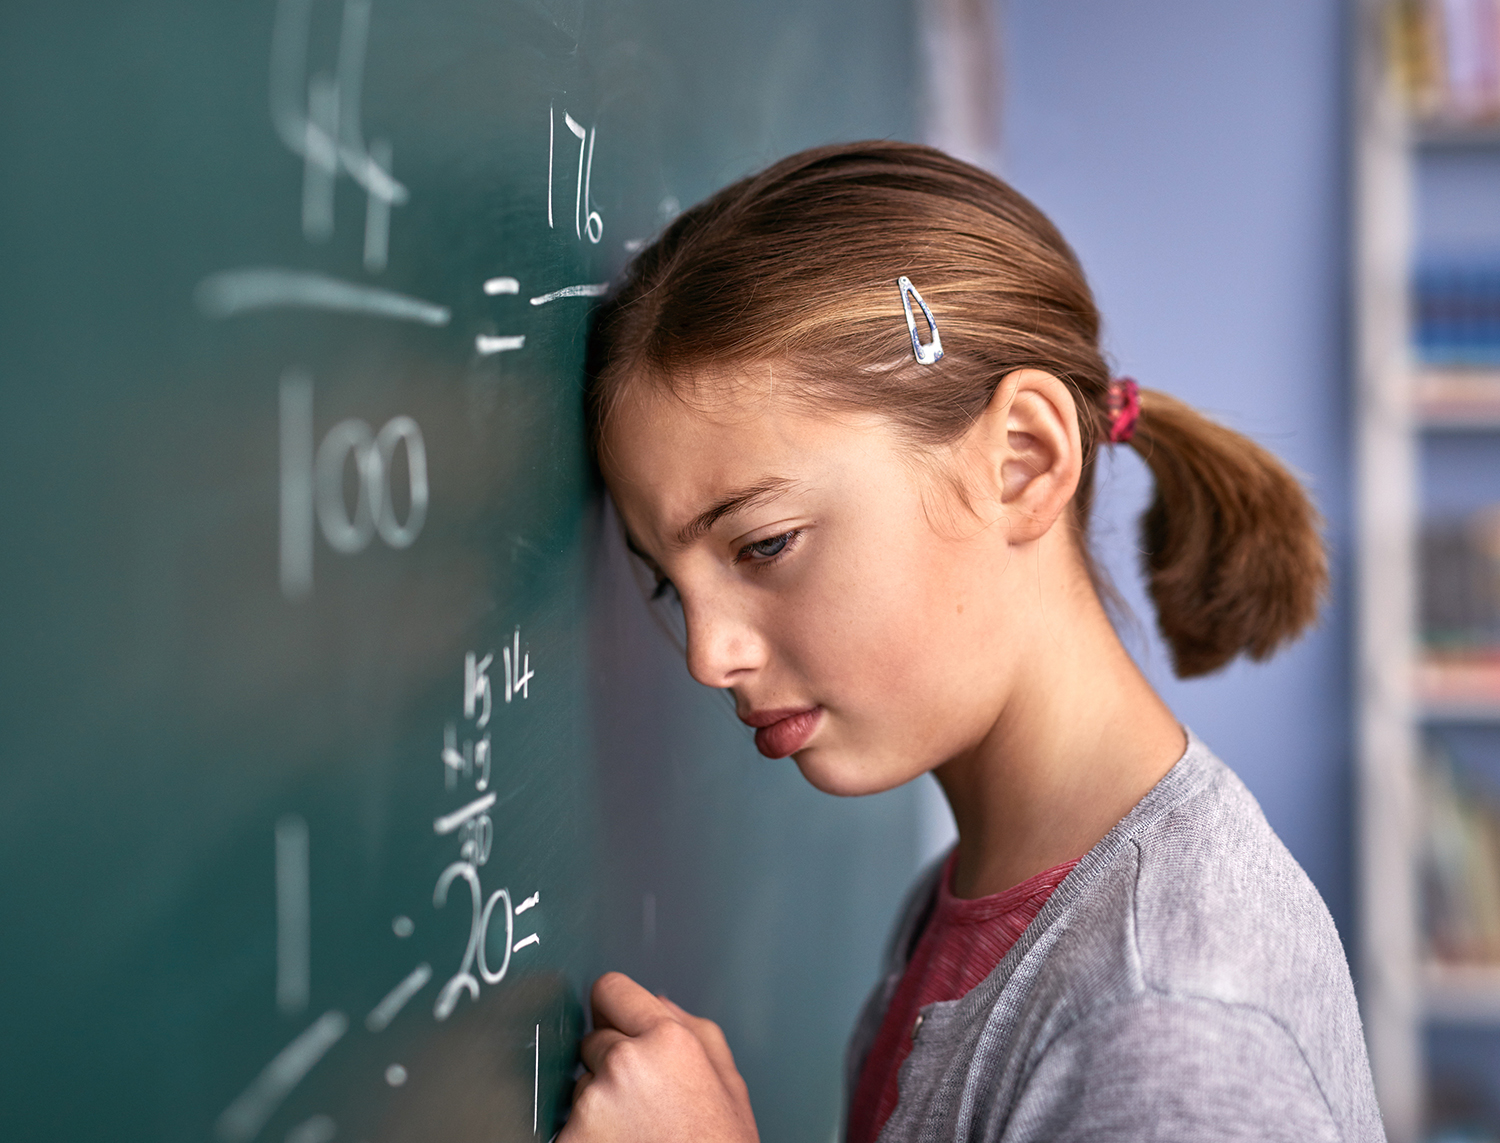 ADHD and Dyscalculia